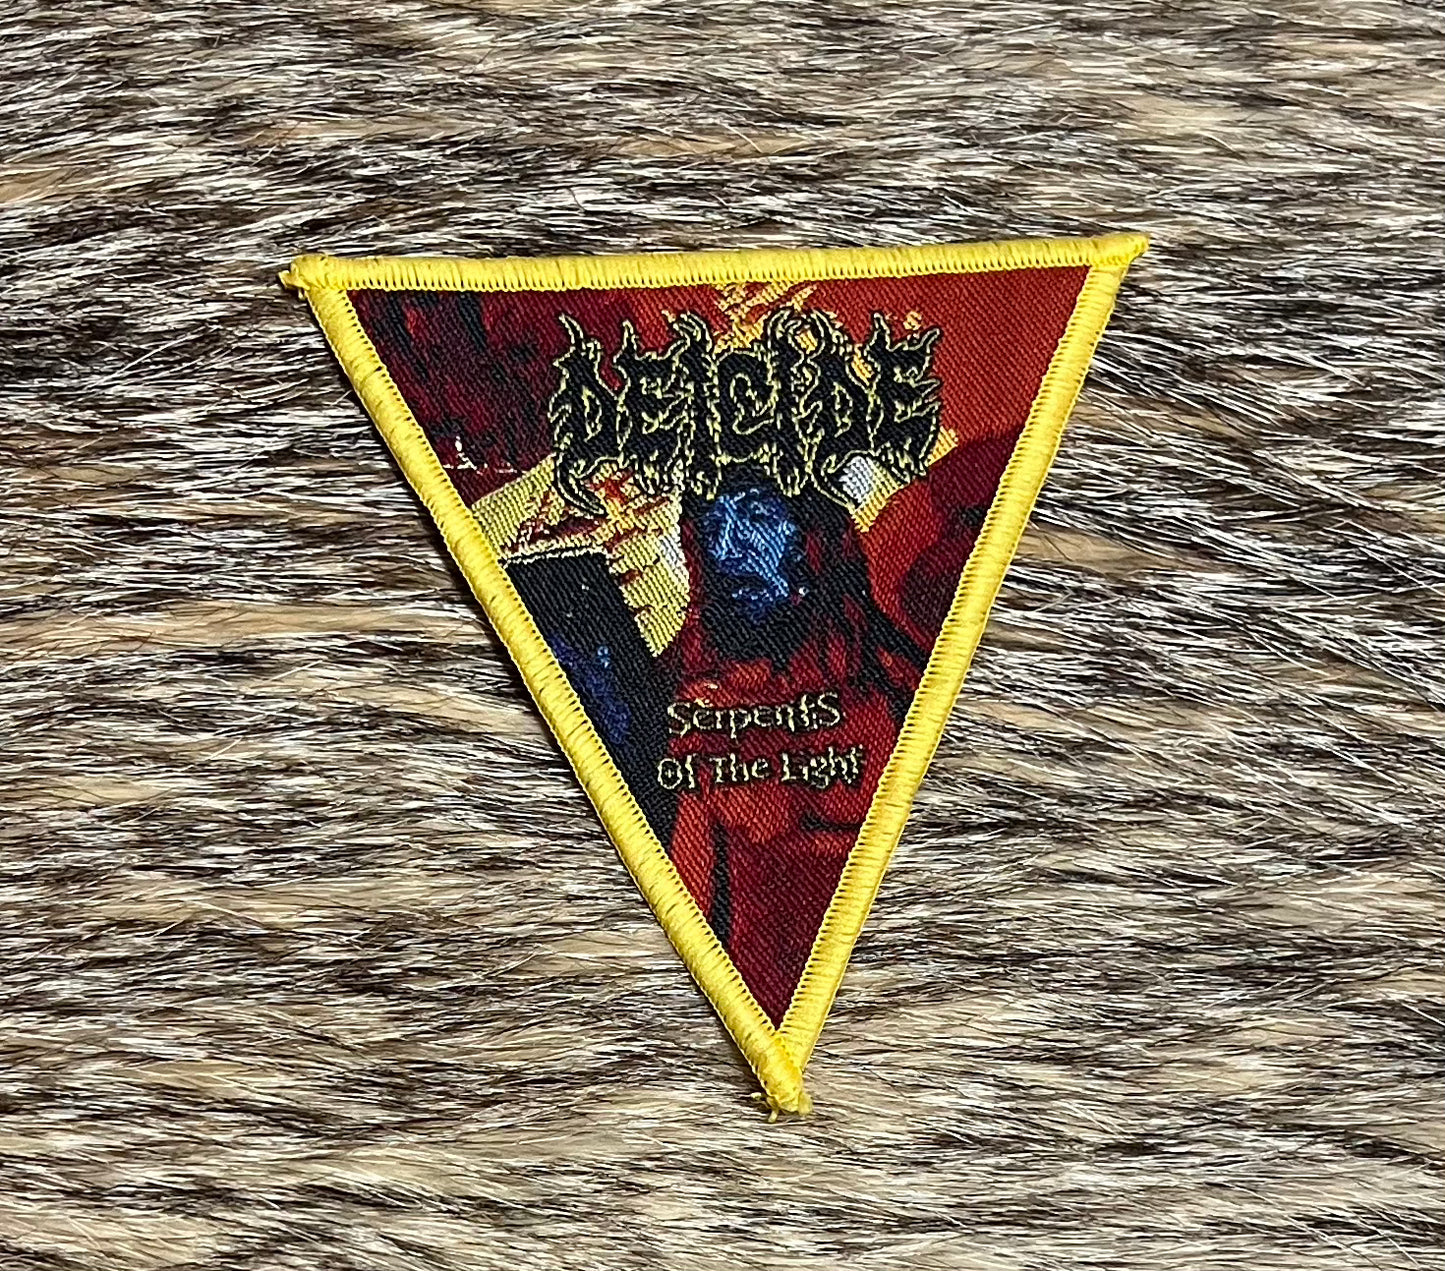 Deicide - Serpents Of The Light Triangular Patch